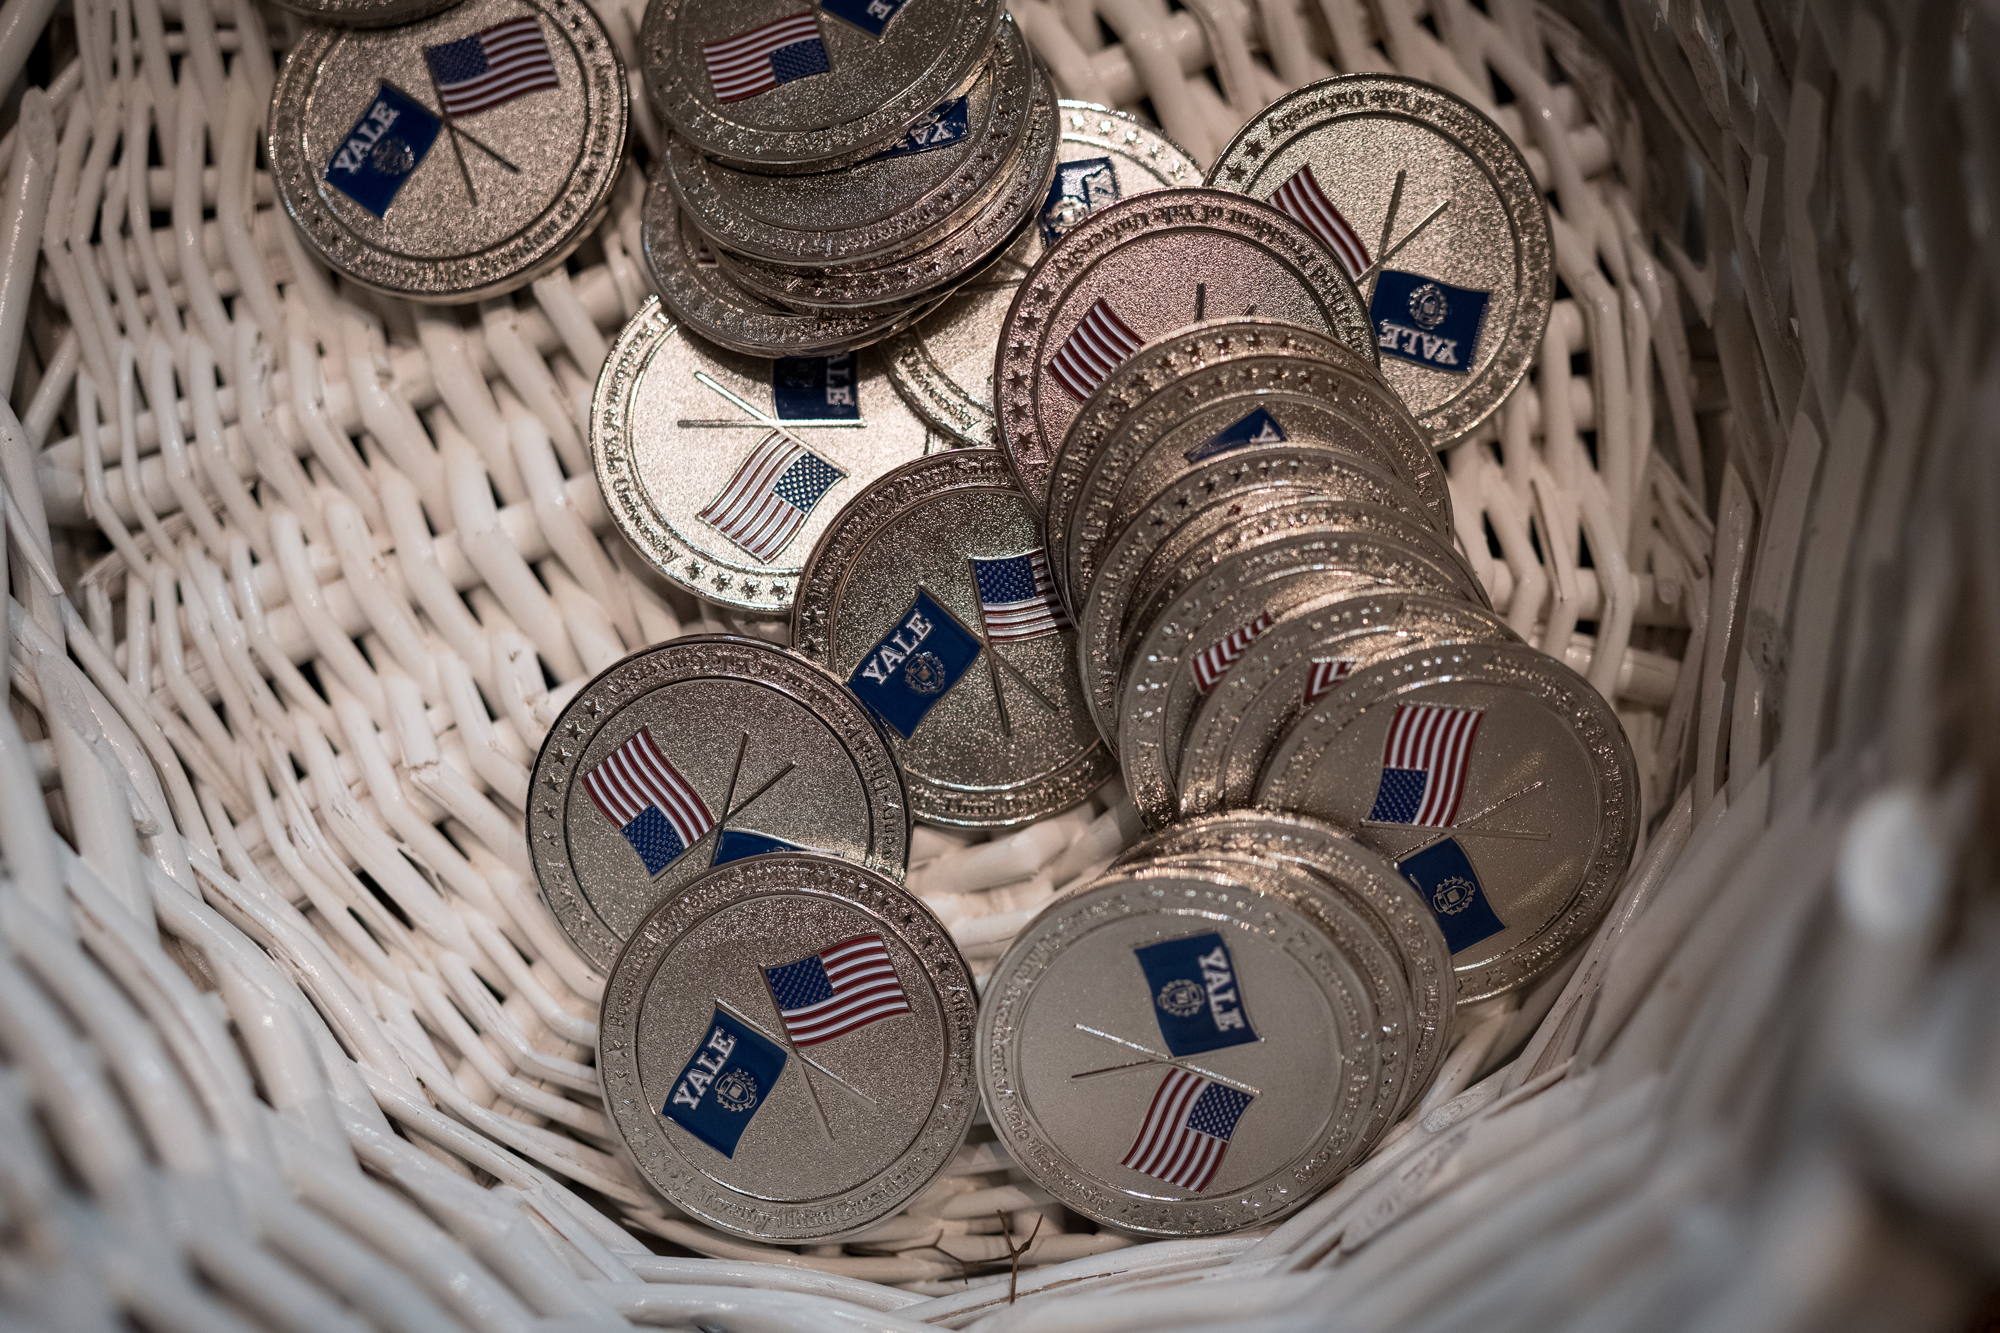 Challenge Coins in a basket